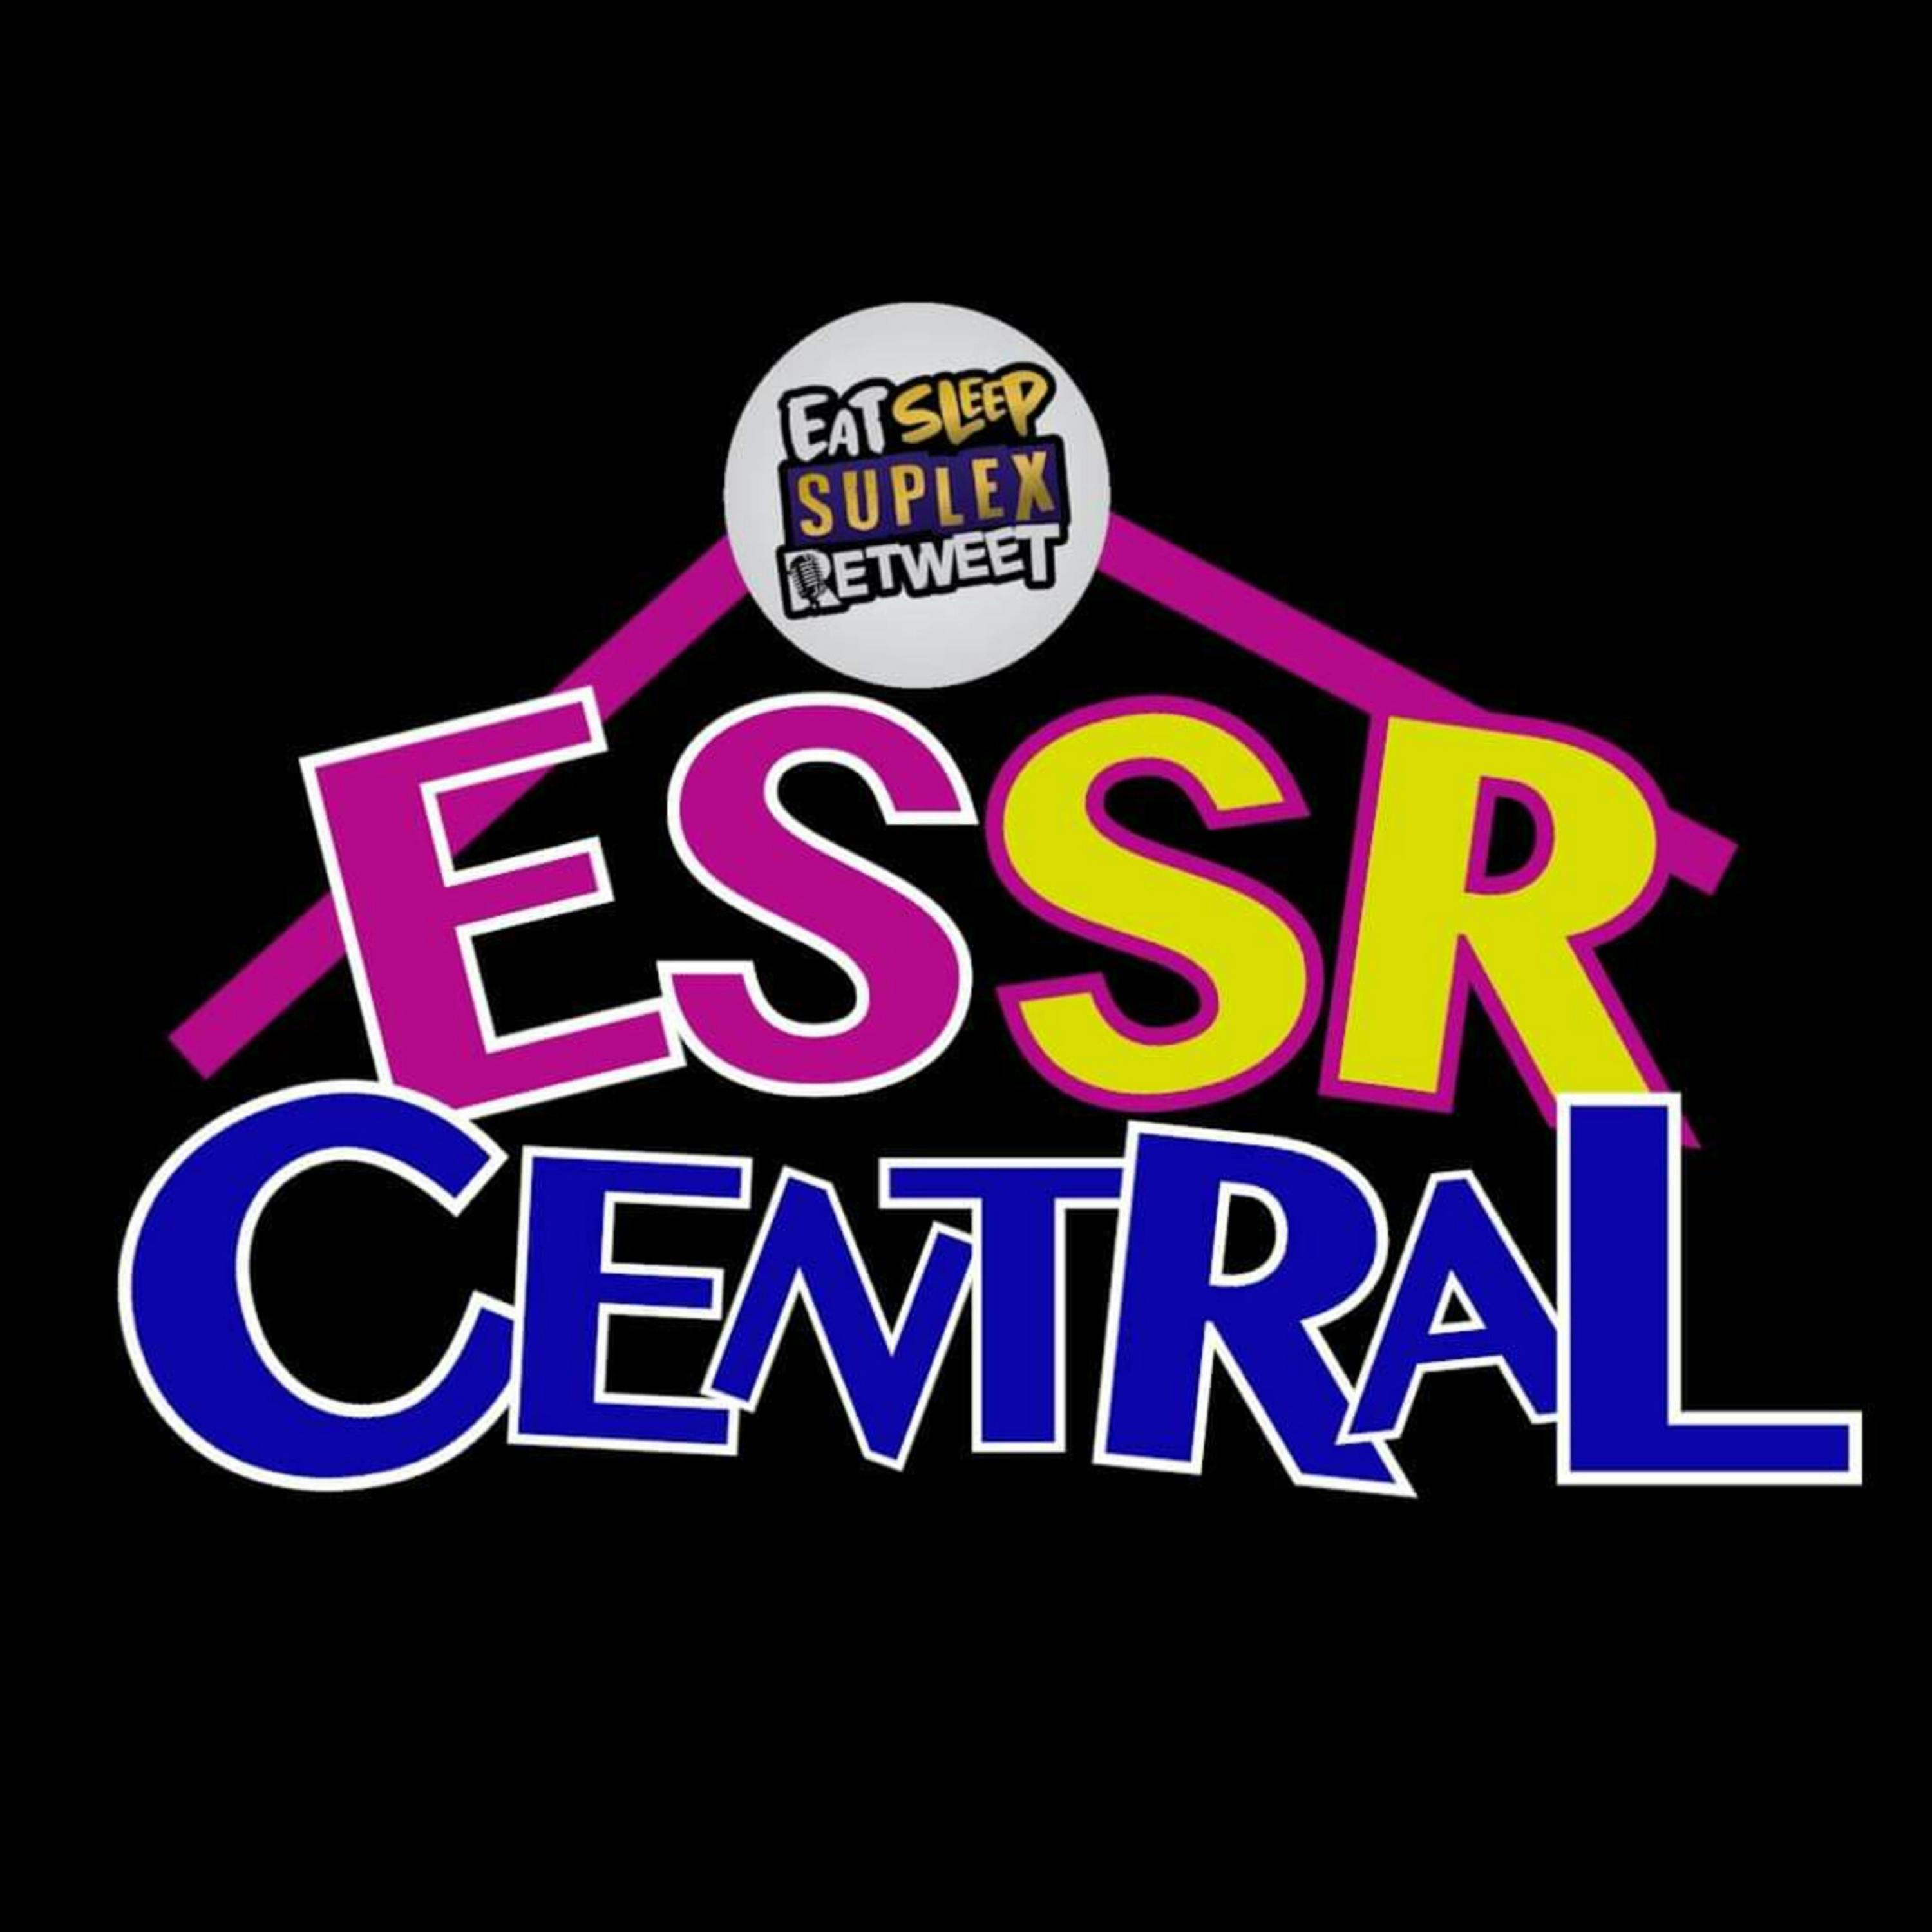 ESSR Central #049 - Transfer Deadline Day, Logos, Boogs and Money